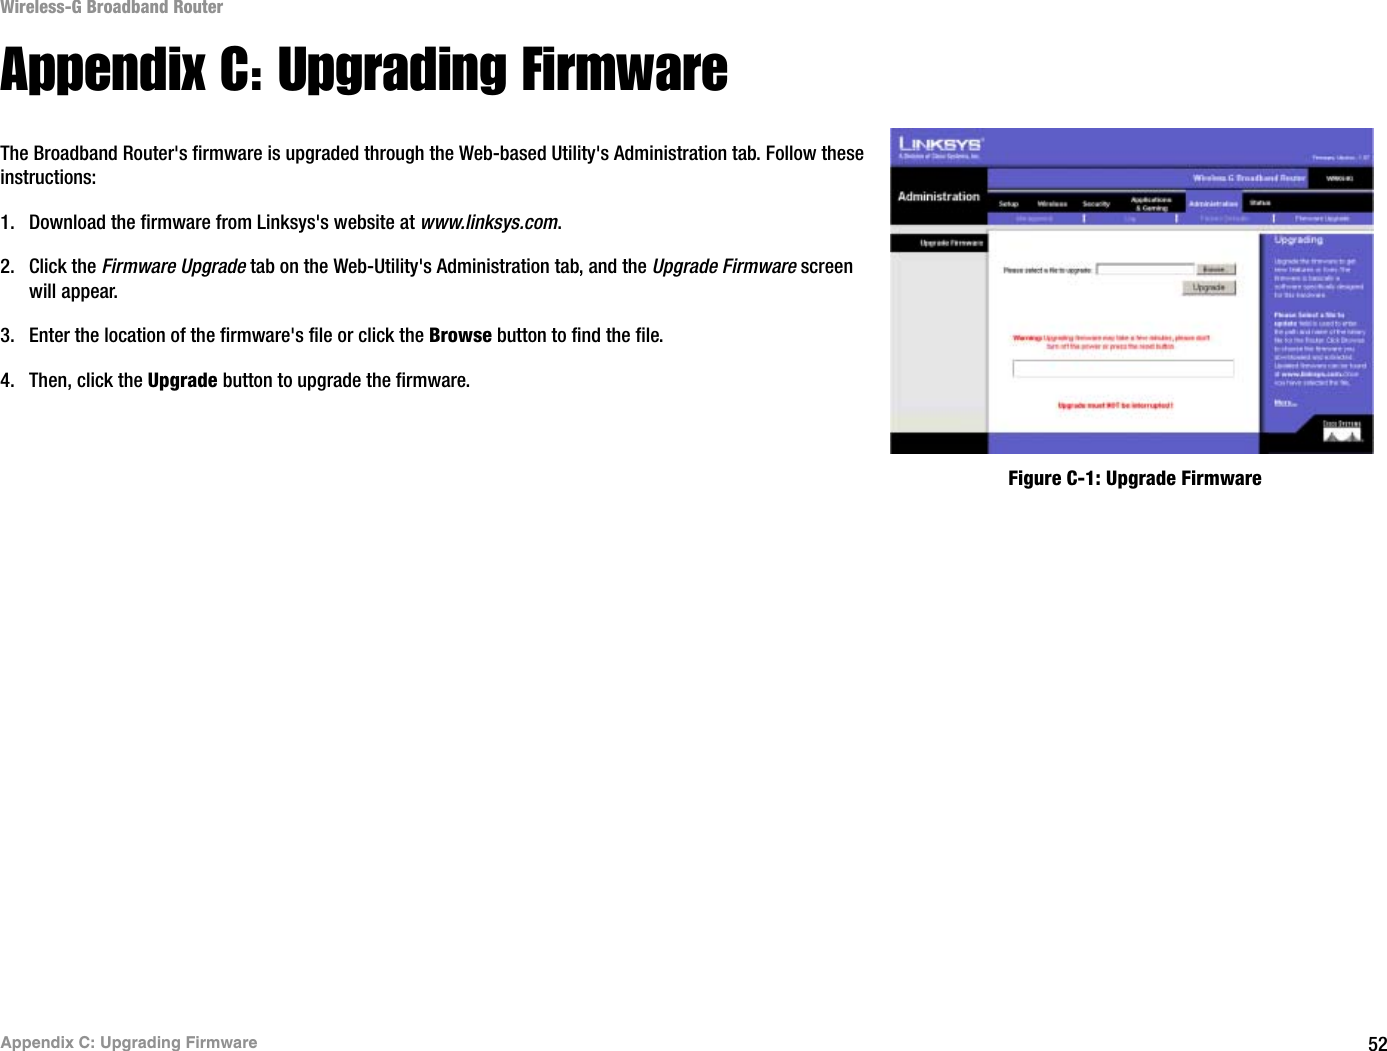 52Appendix C: Upgrading FirmwareWireless-G Broadband RouterAppendix C: Upgrading FirmwareThe Broadband Router&apos;s firmware is upgraded through the Web-based Utility&apos;s Administration tab. Follow these instructions:1. Download the firmware from Linksys&apos;s website at www.linksys.com.2. Click the Firmware Upgrade tab on the Web-Utility&apos;s Administration tab, and the Upgrade Firmware screen will appear.3. Enter the location of the firmware&apos;s file or click the Browse button to find the file. 4. Then, click the Upgrade button to upgrade the firmware.Figure C-1: Upgrade Firmware